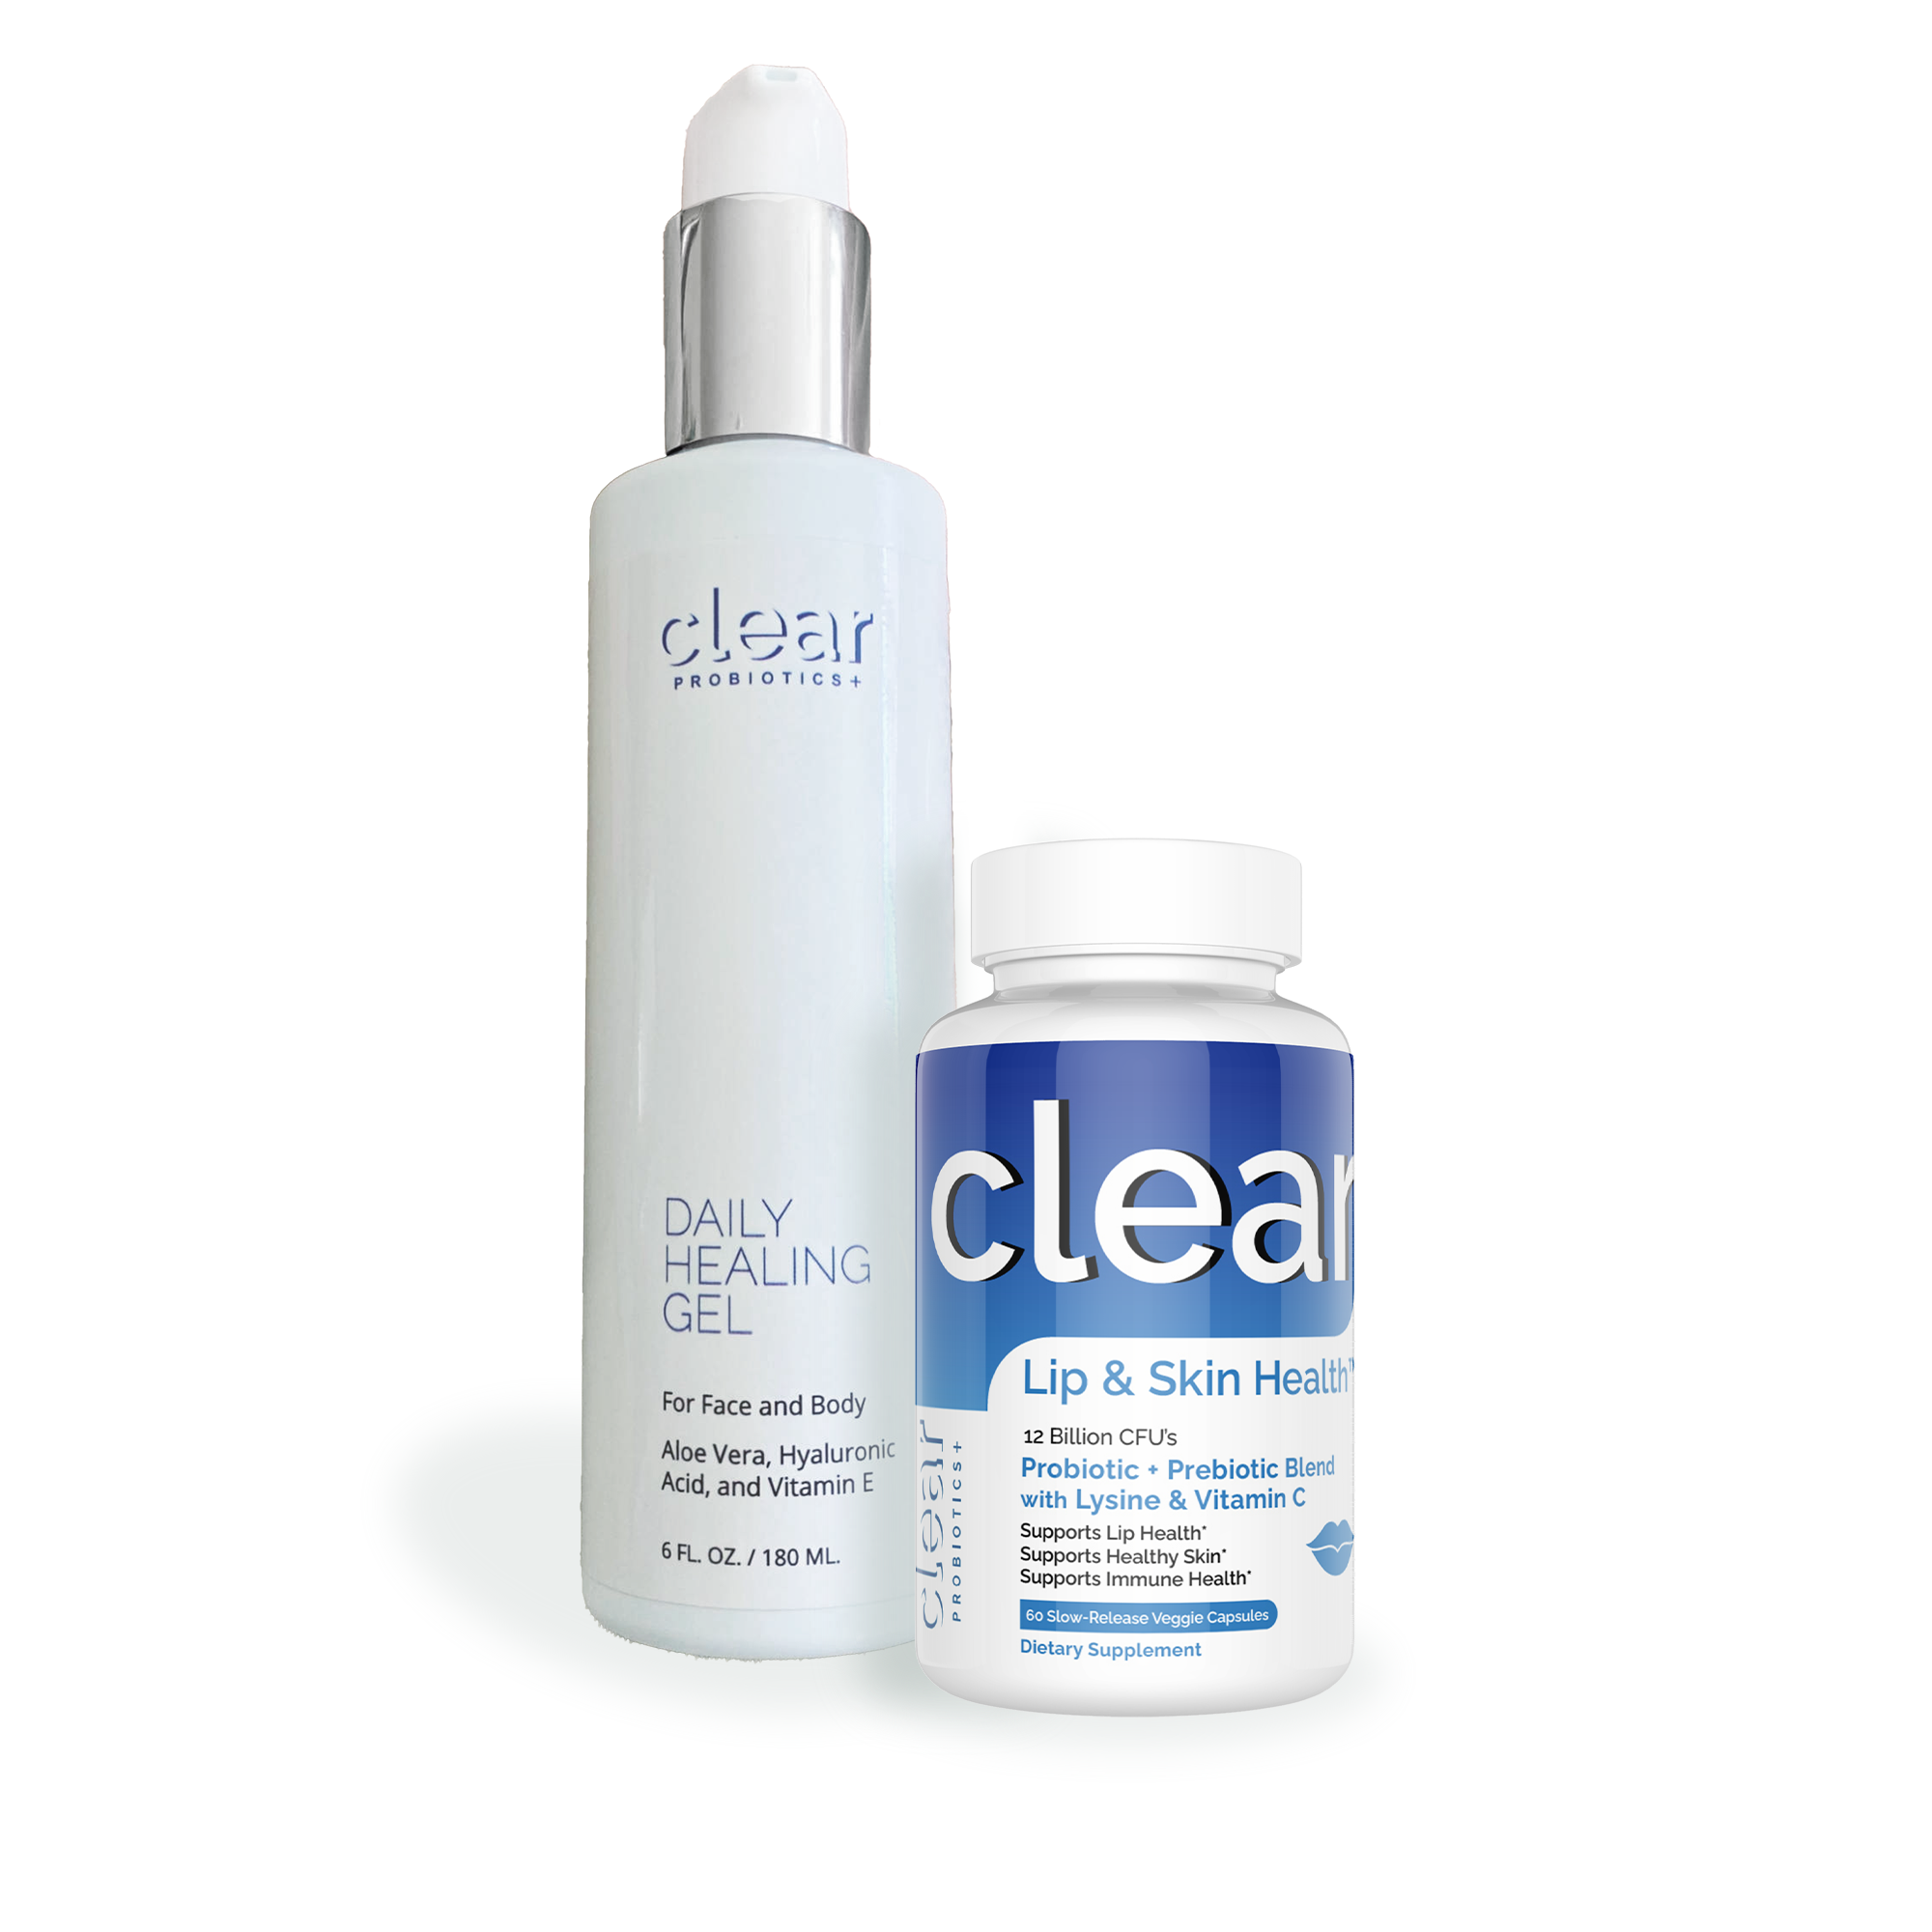 Clear Daily Healing Gel combines well with Clear Lip & Skin Health